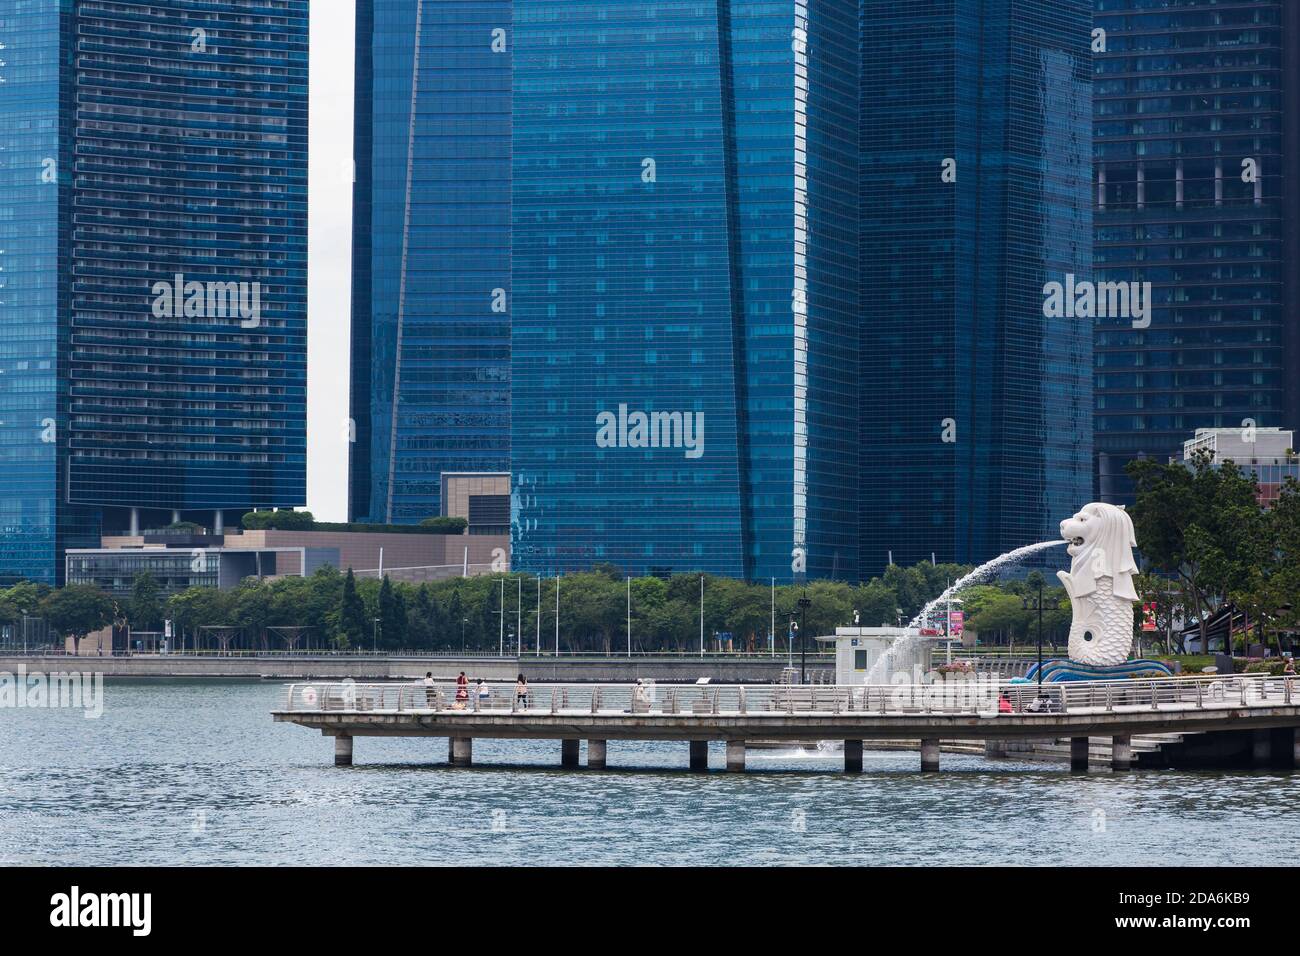 Cityscape view of Merlion and Marina Bay Financial Centre Towers architecture. Singapore, 2020. Stock Photo